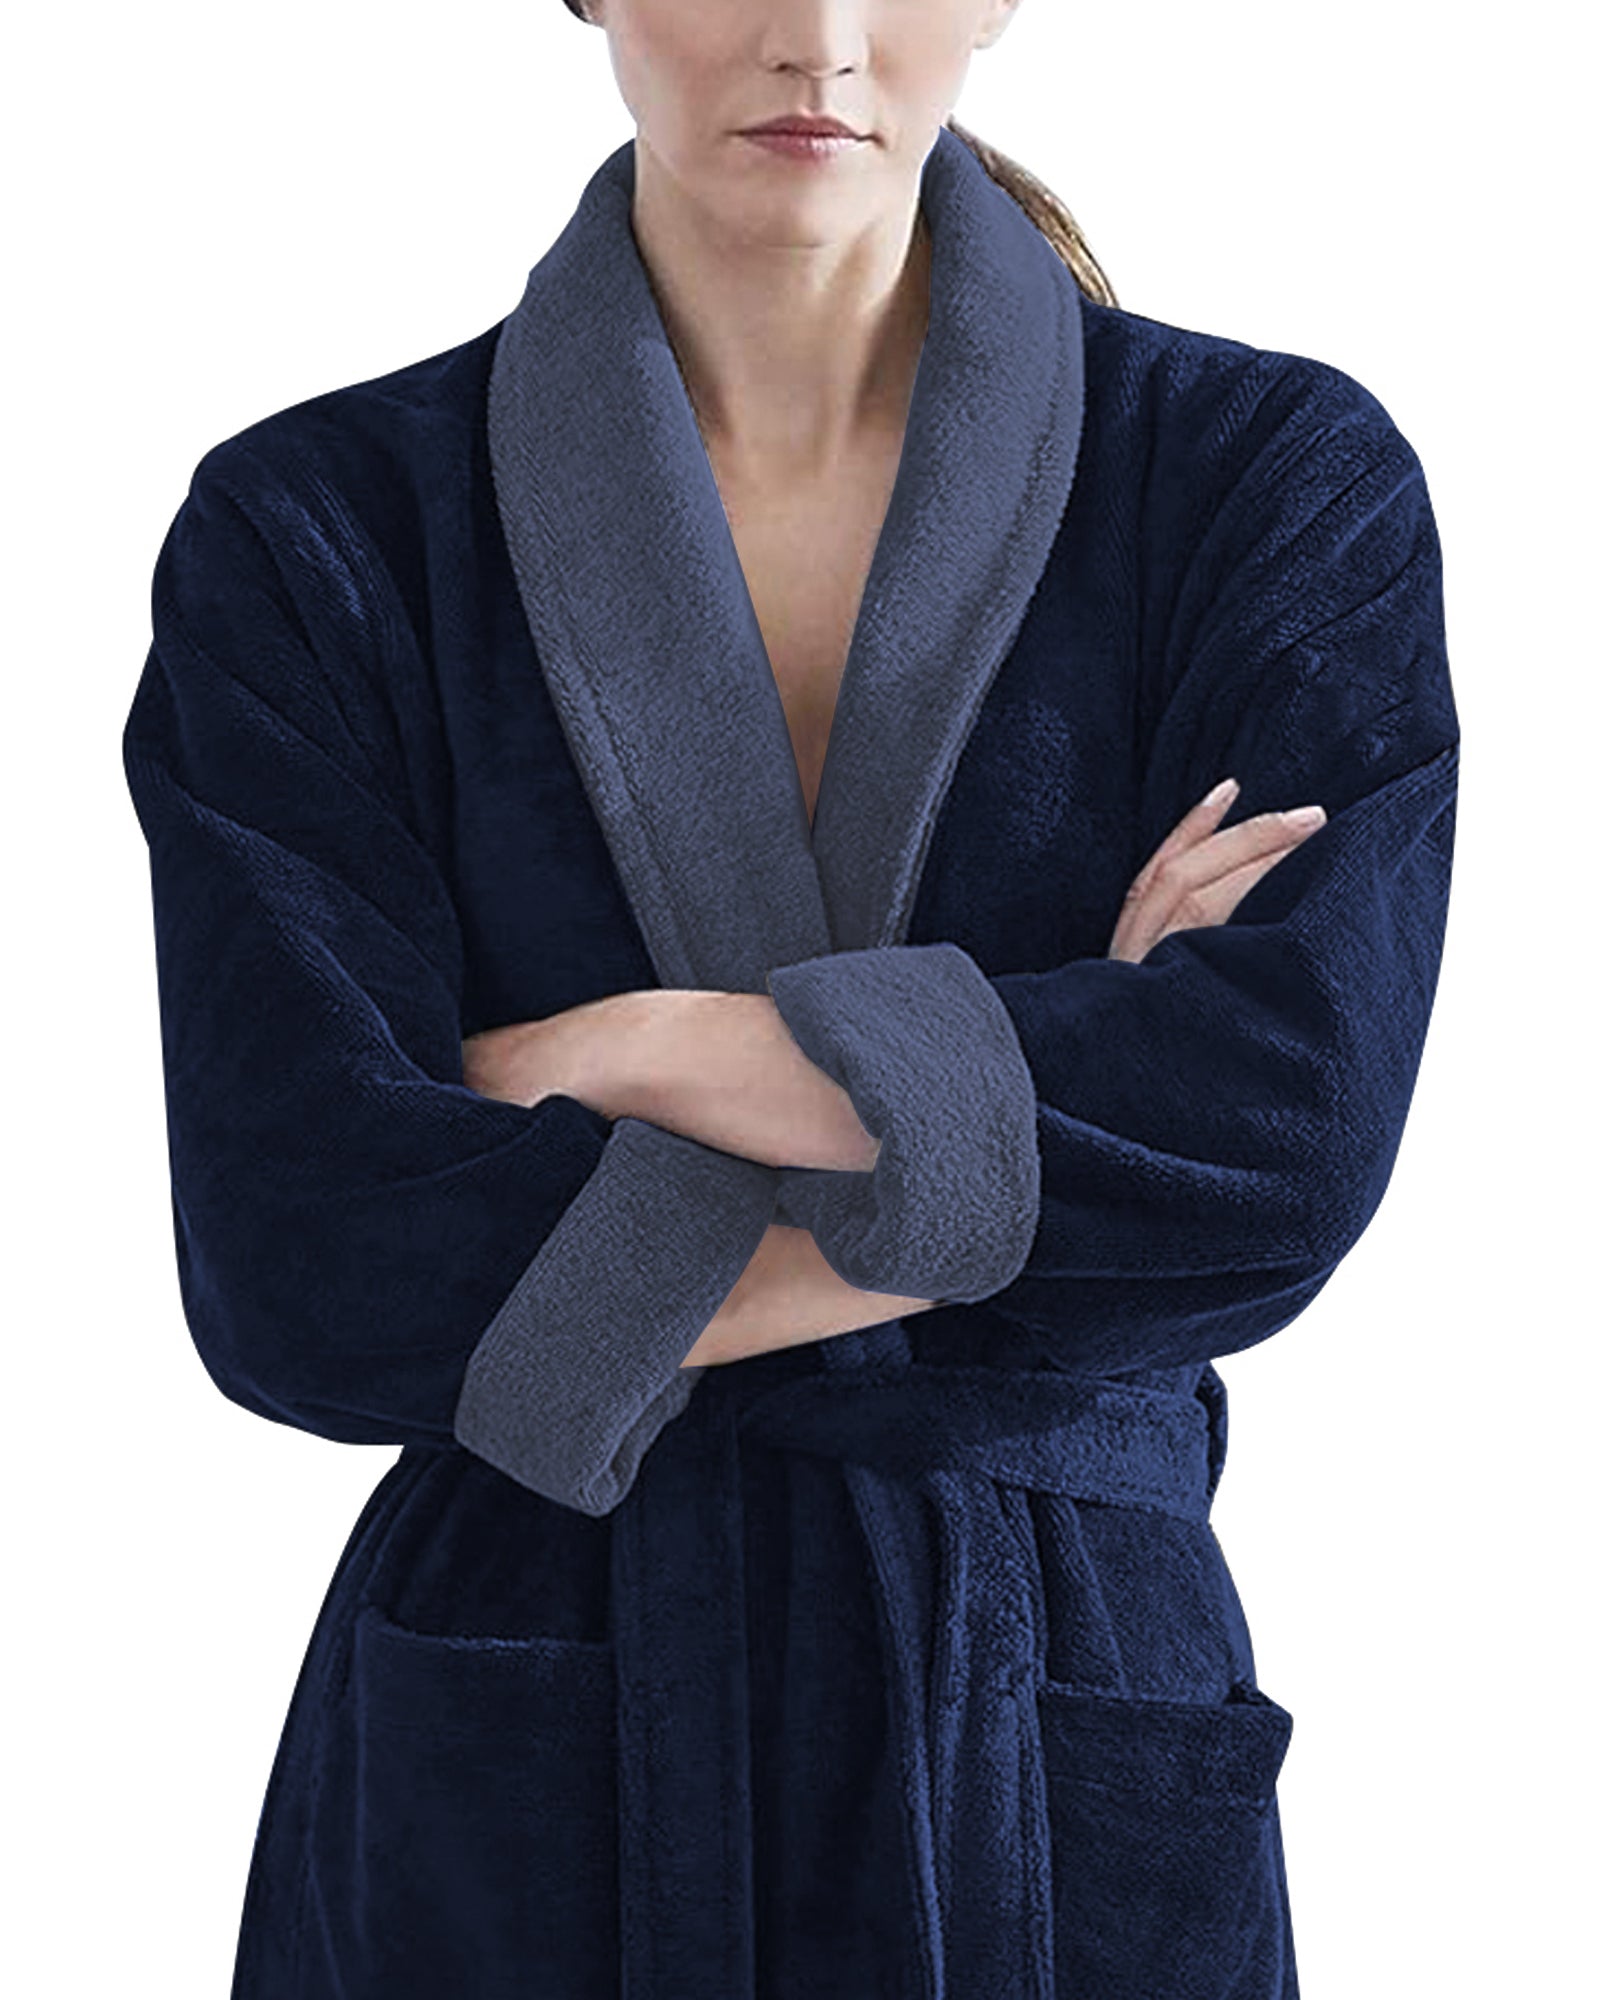 Women's Bathrobe with Tie-Up and Pockets